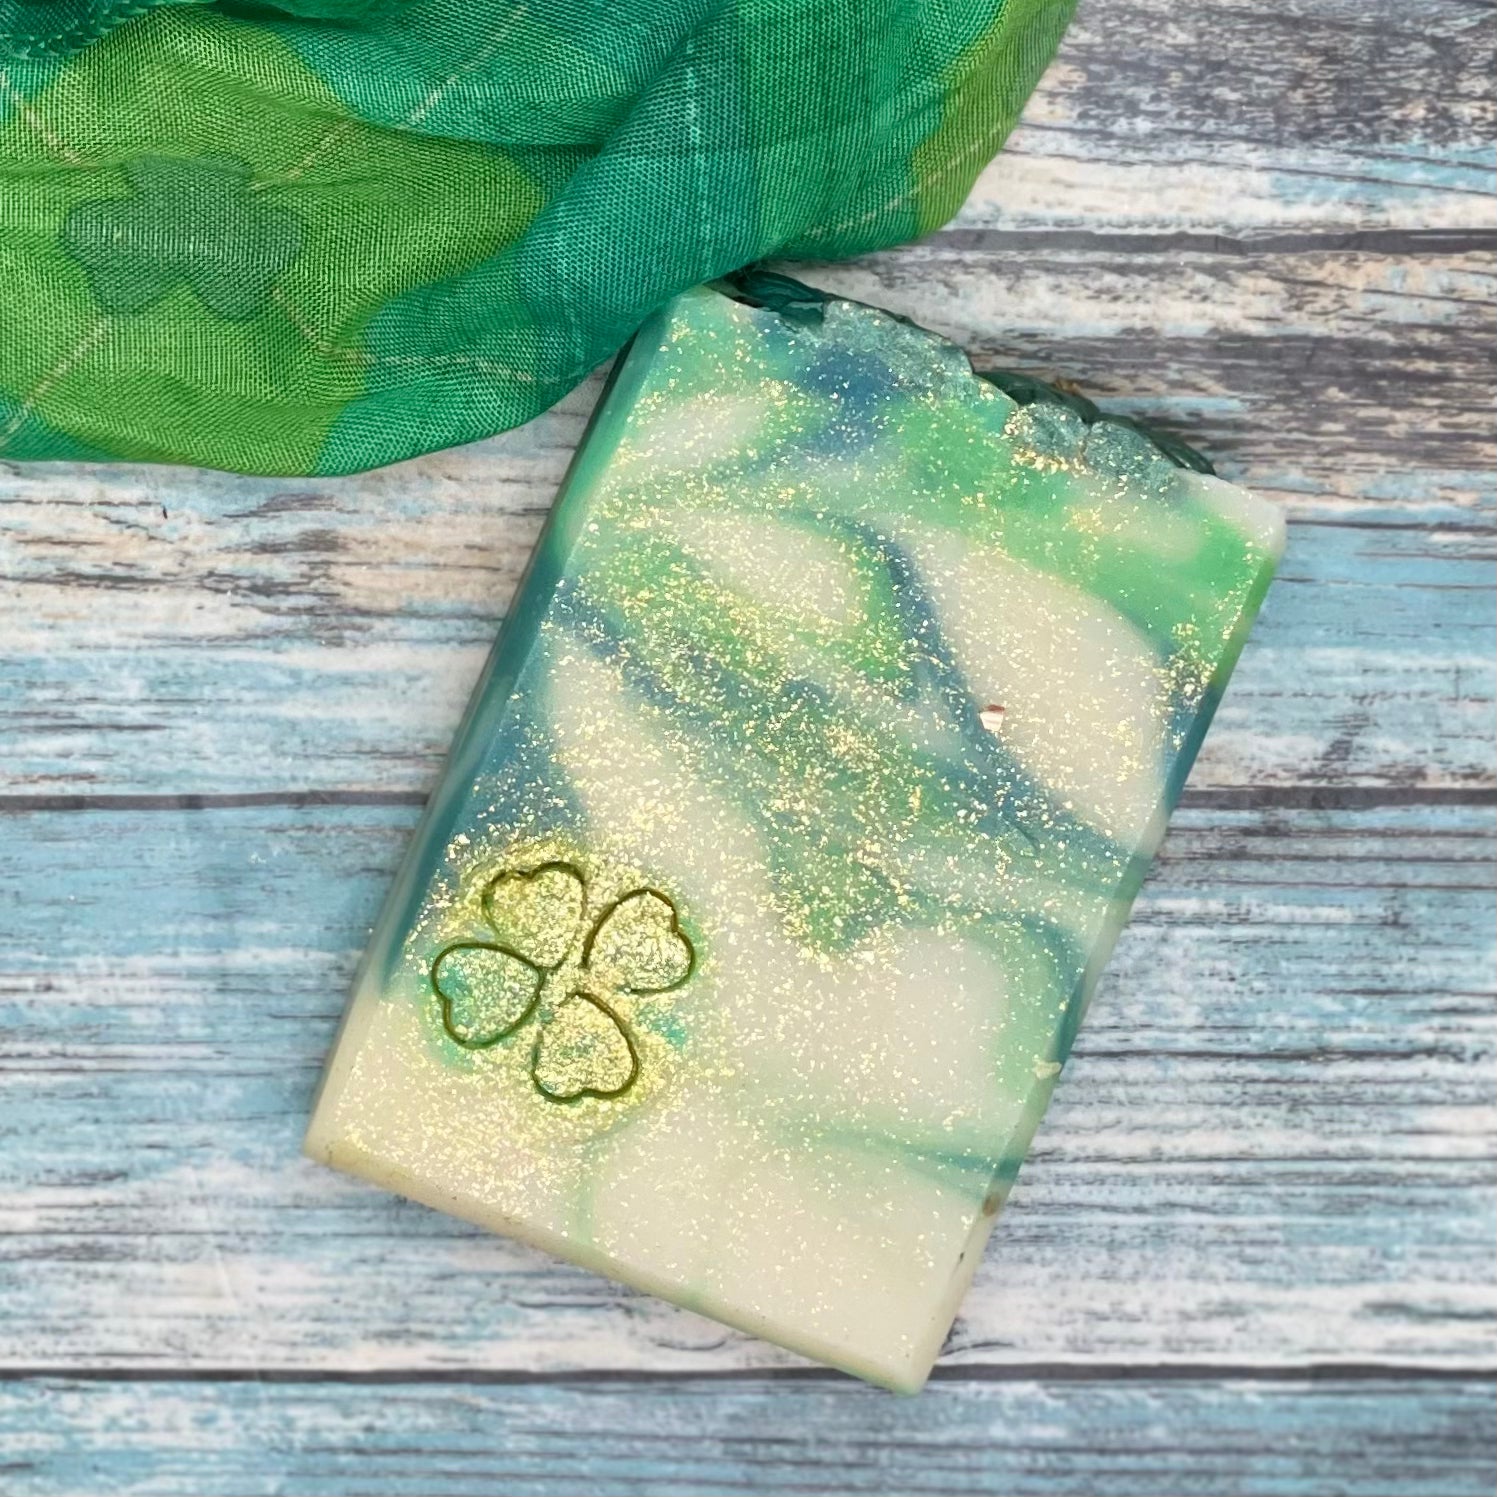 Feeling lucky handmade soap close up. Green and white swirled bar with shamrock stamp and gold dust sparkles.